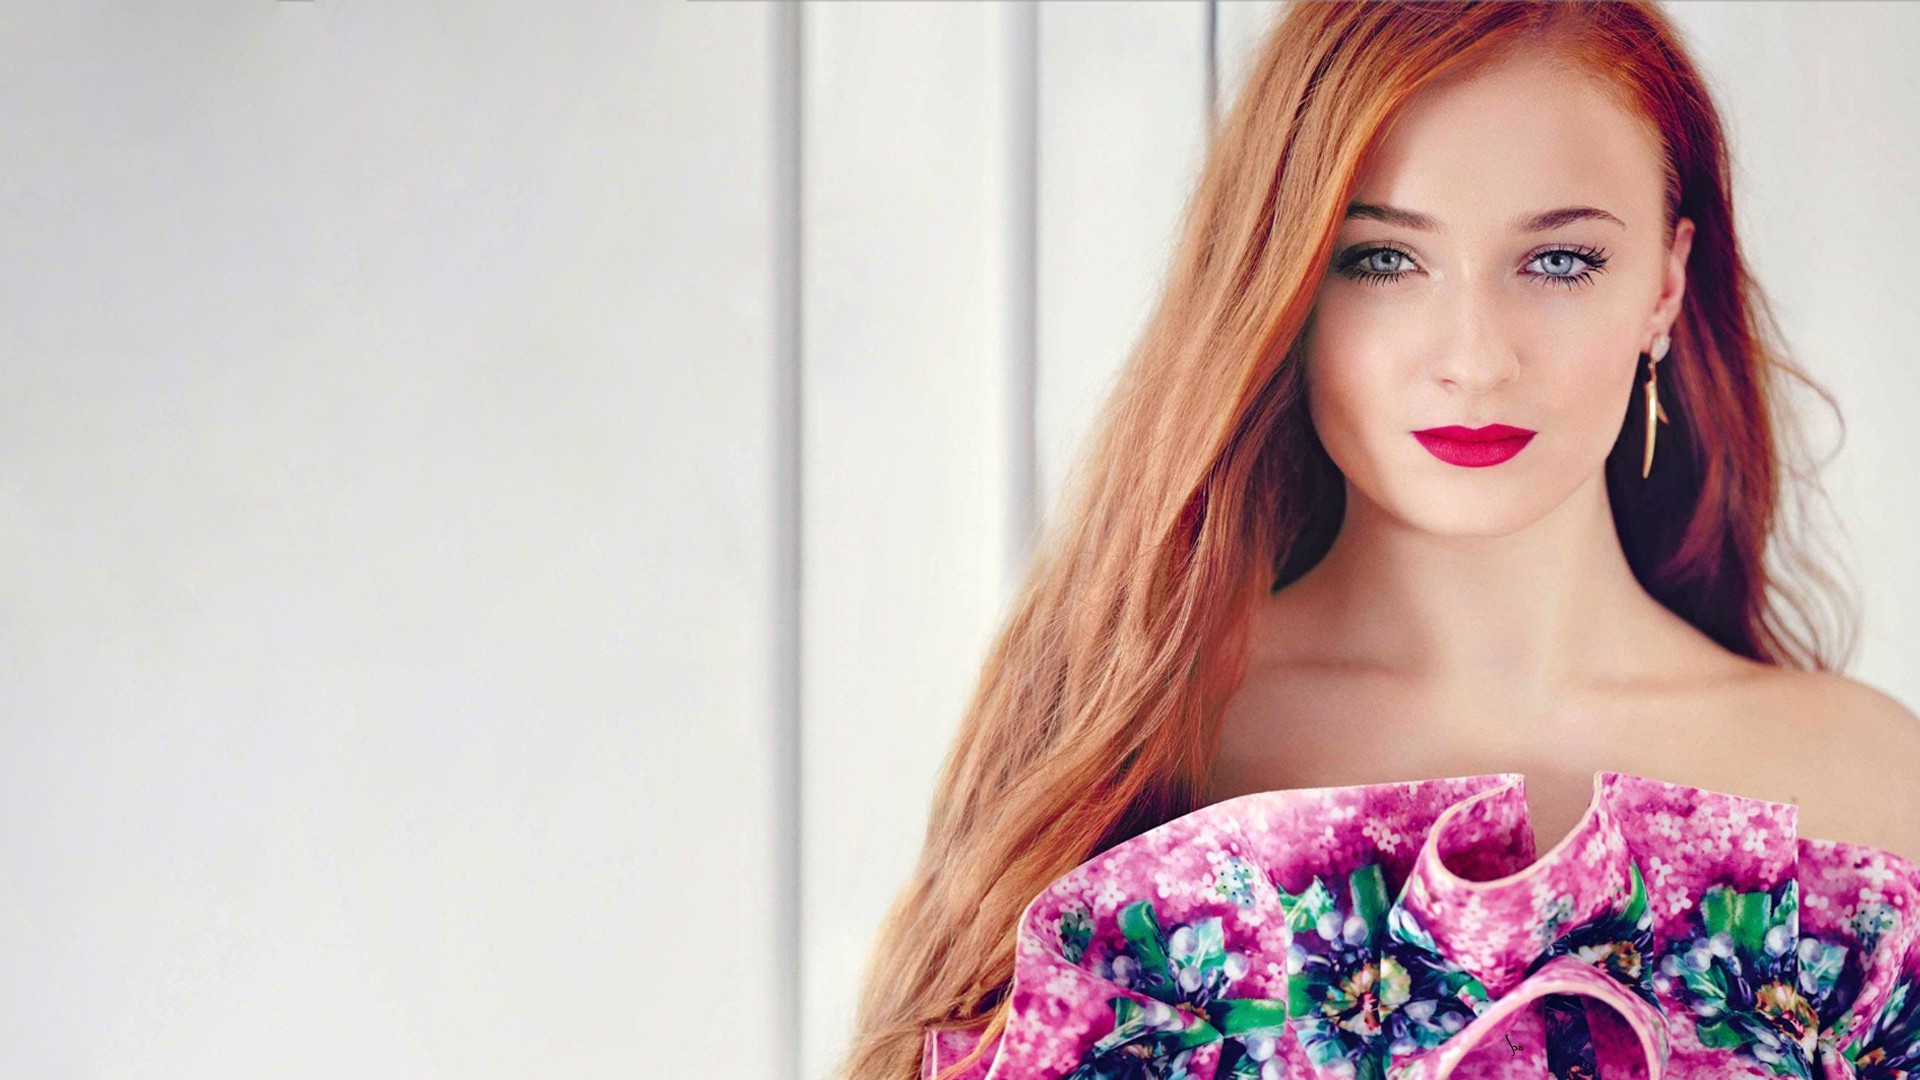 Sophie Turner, Actress, Redhead, Blue Eyes, Red Lipstick Wallpaper